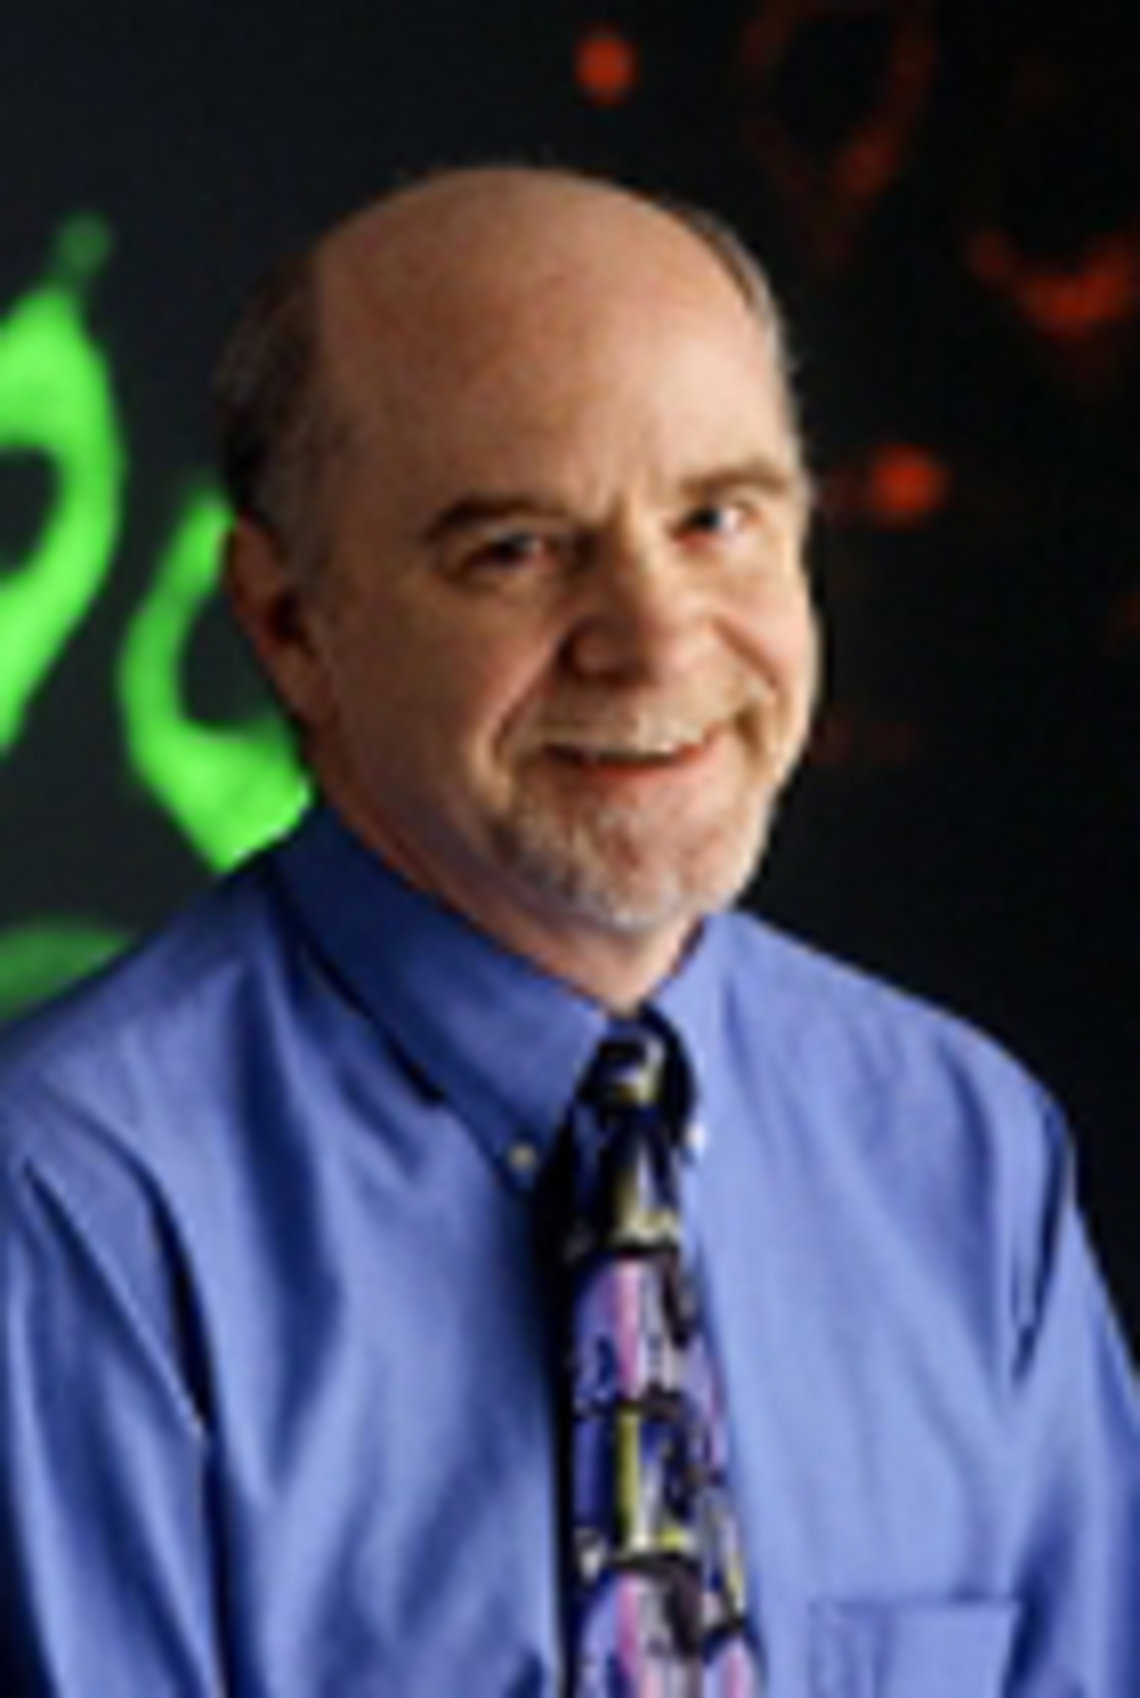 Dr. O'Shea, in a blue shirt, poses against a black and green background